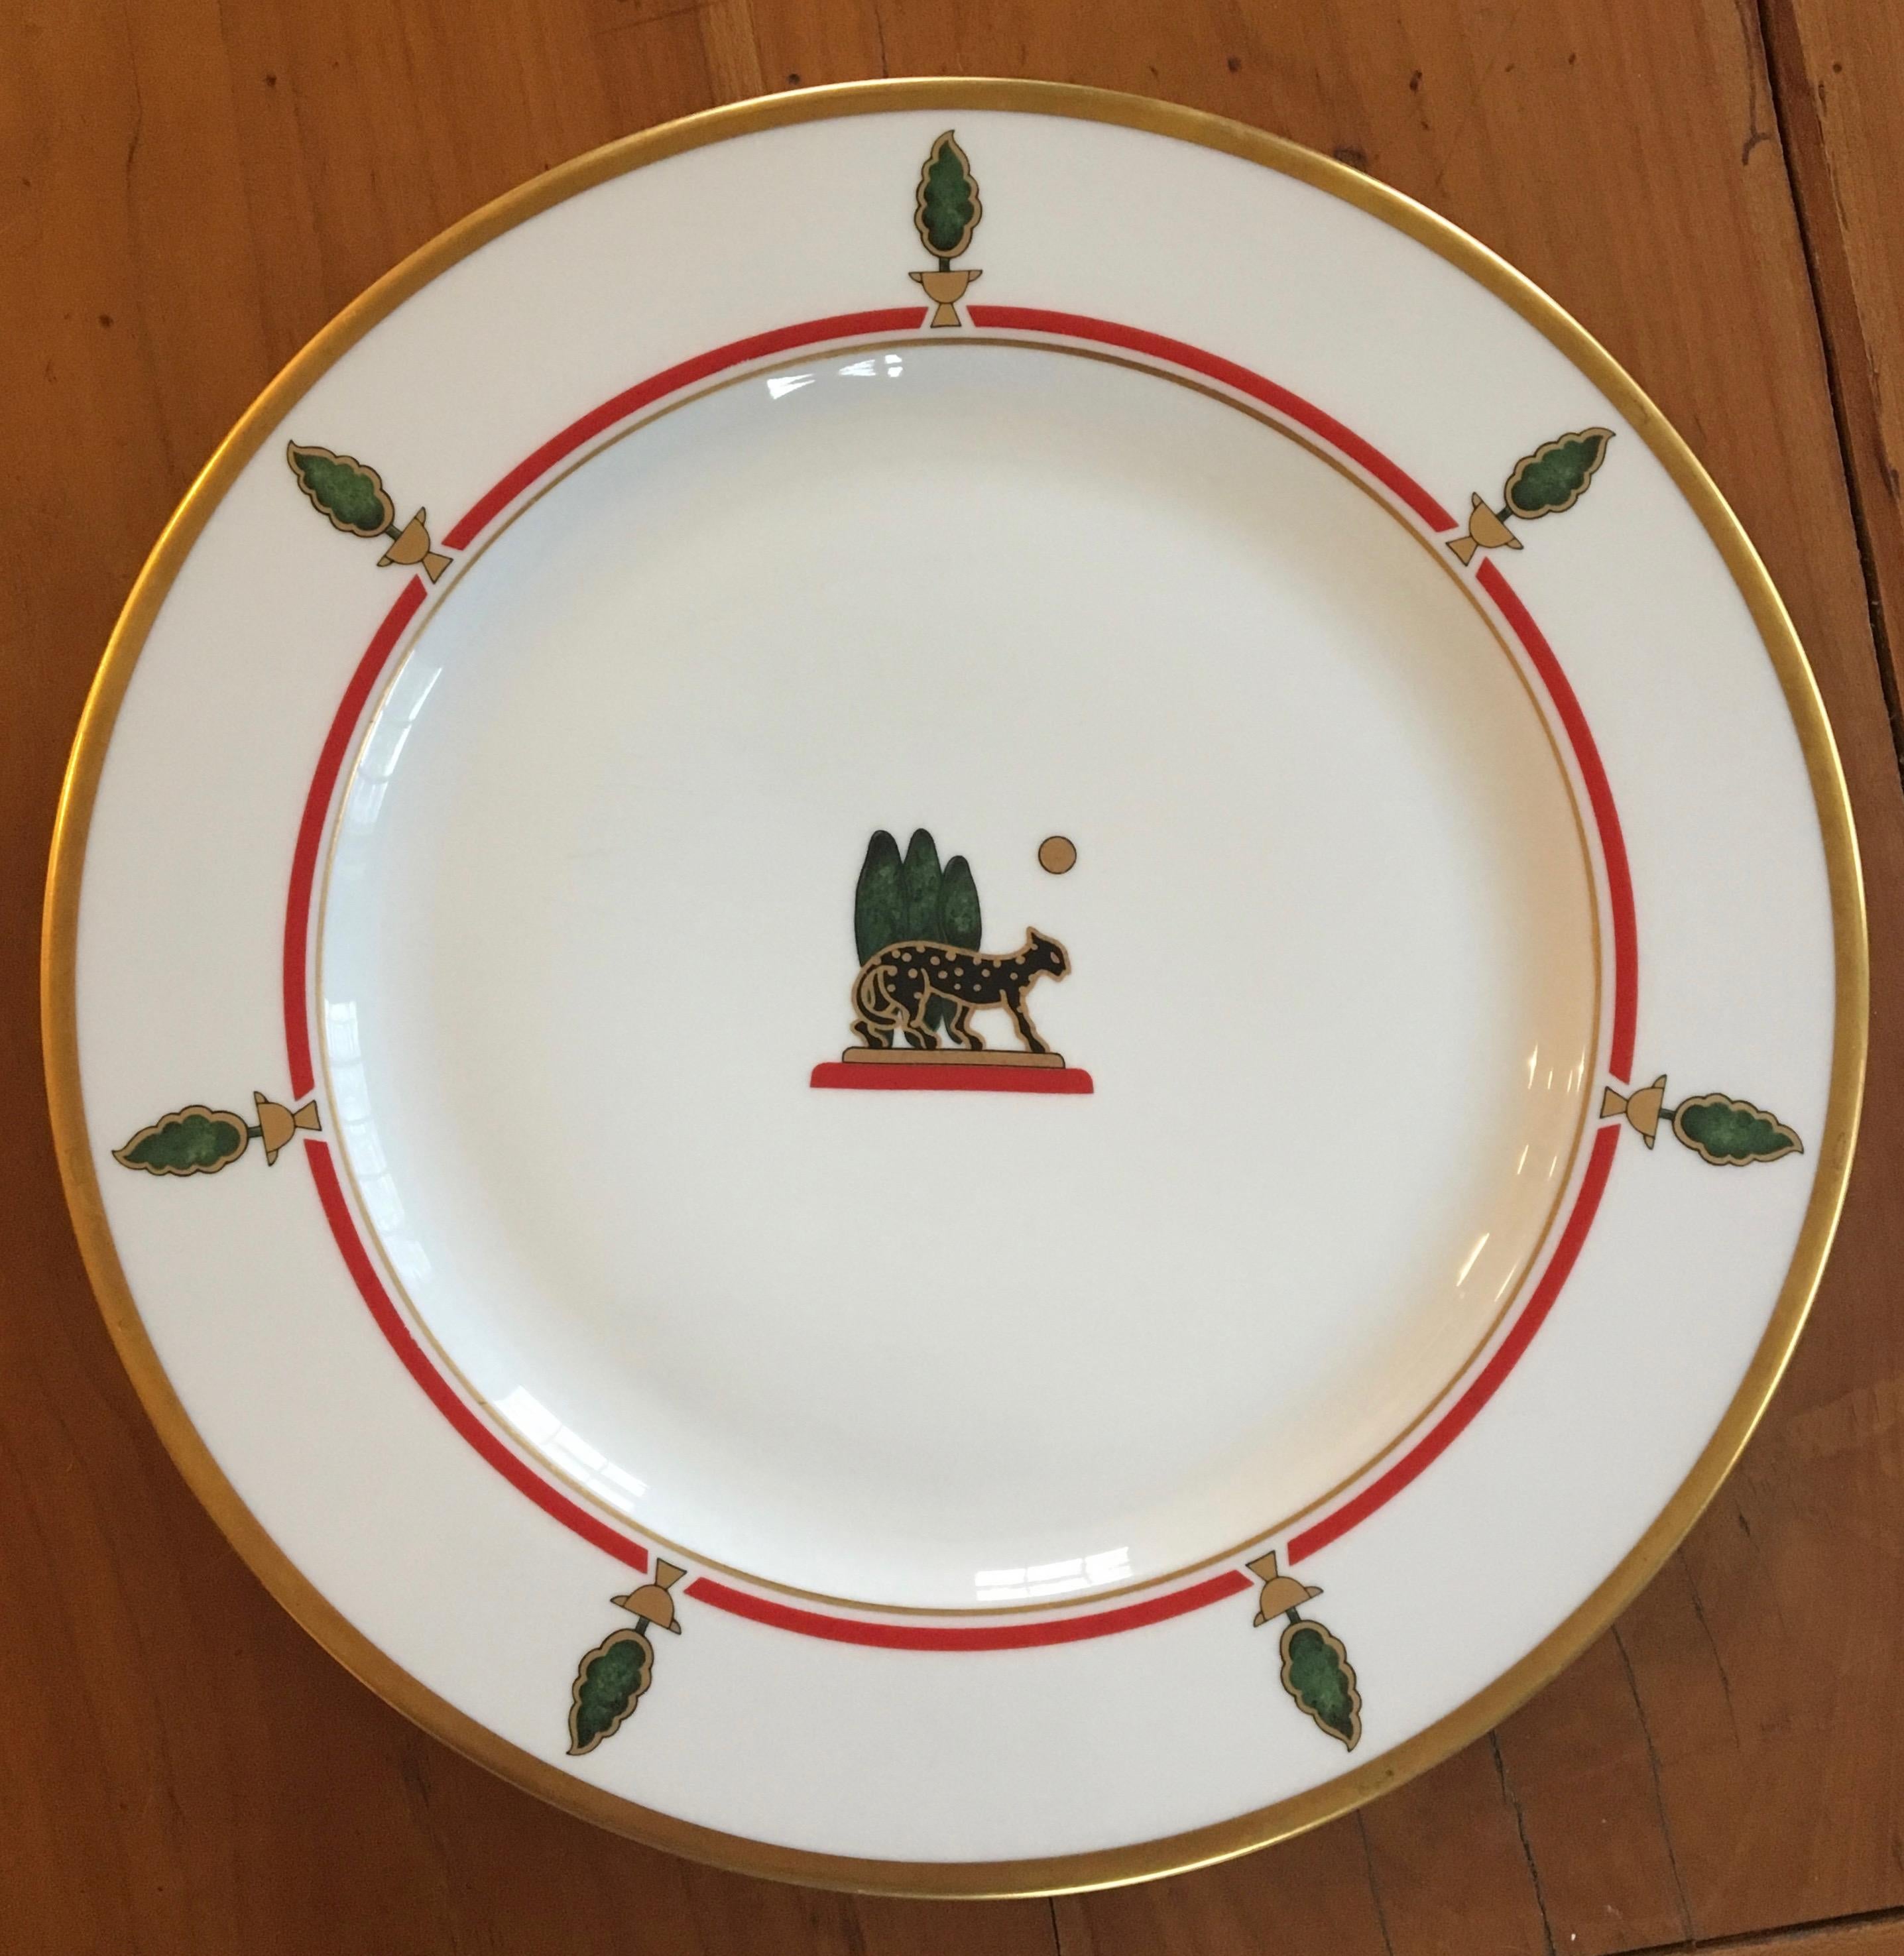 Cartier tabletop. A Cartier Limoges collaboration from the 1980s.
Featuring gold rim and detail, the classic Cartier black panther, red inner band, green topiaries, trees, animalia. Set includes 8 large charger/service plates. Made in France. All